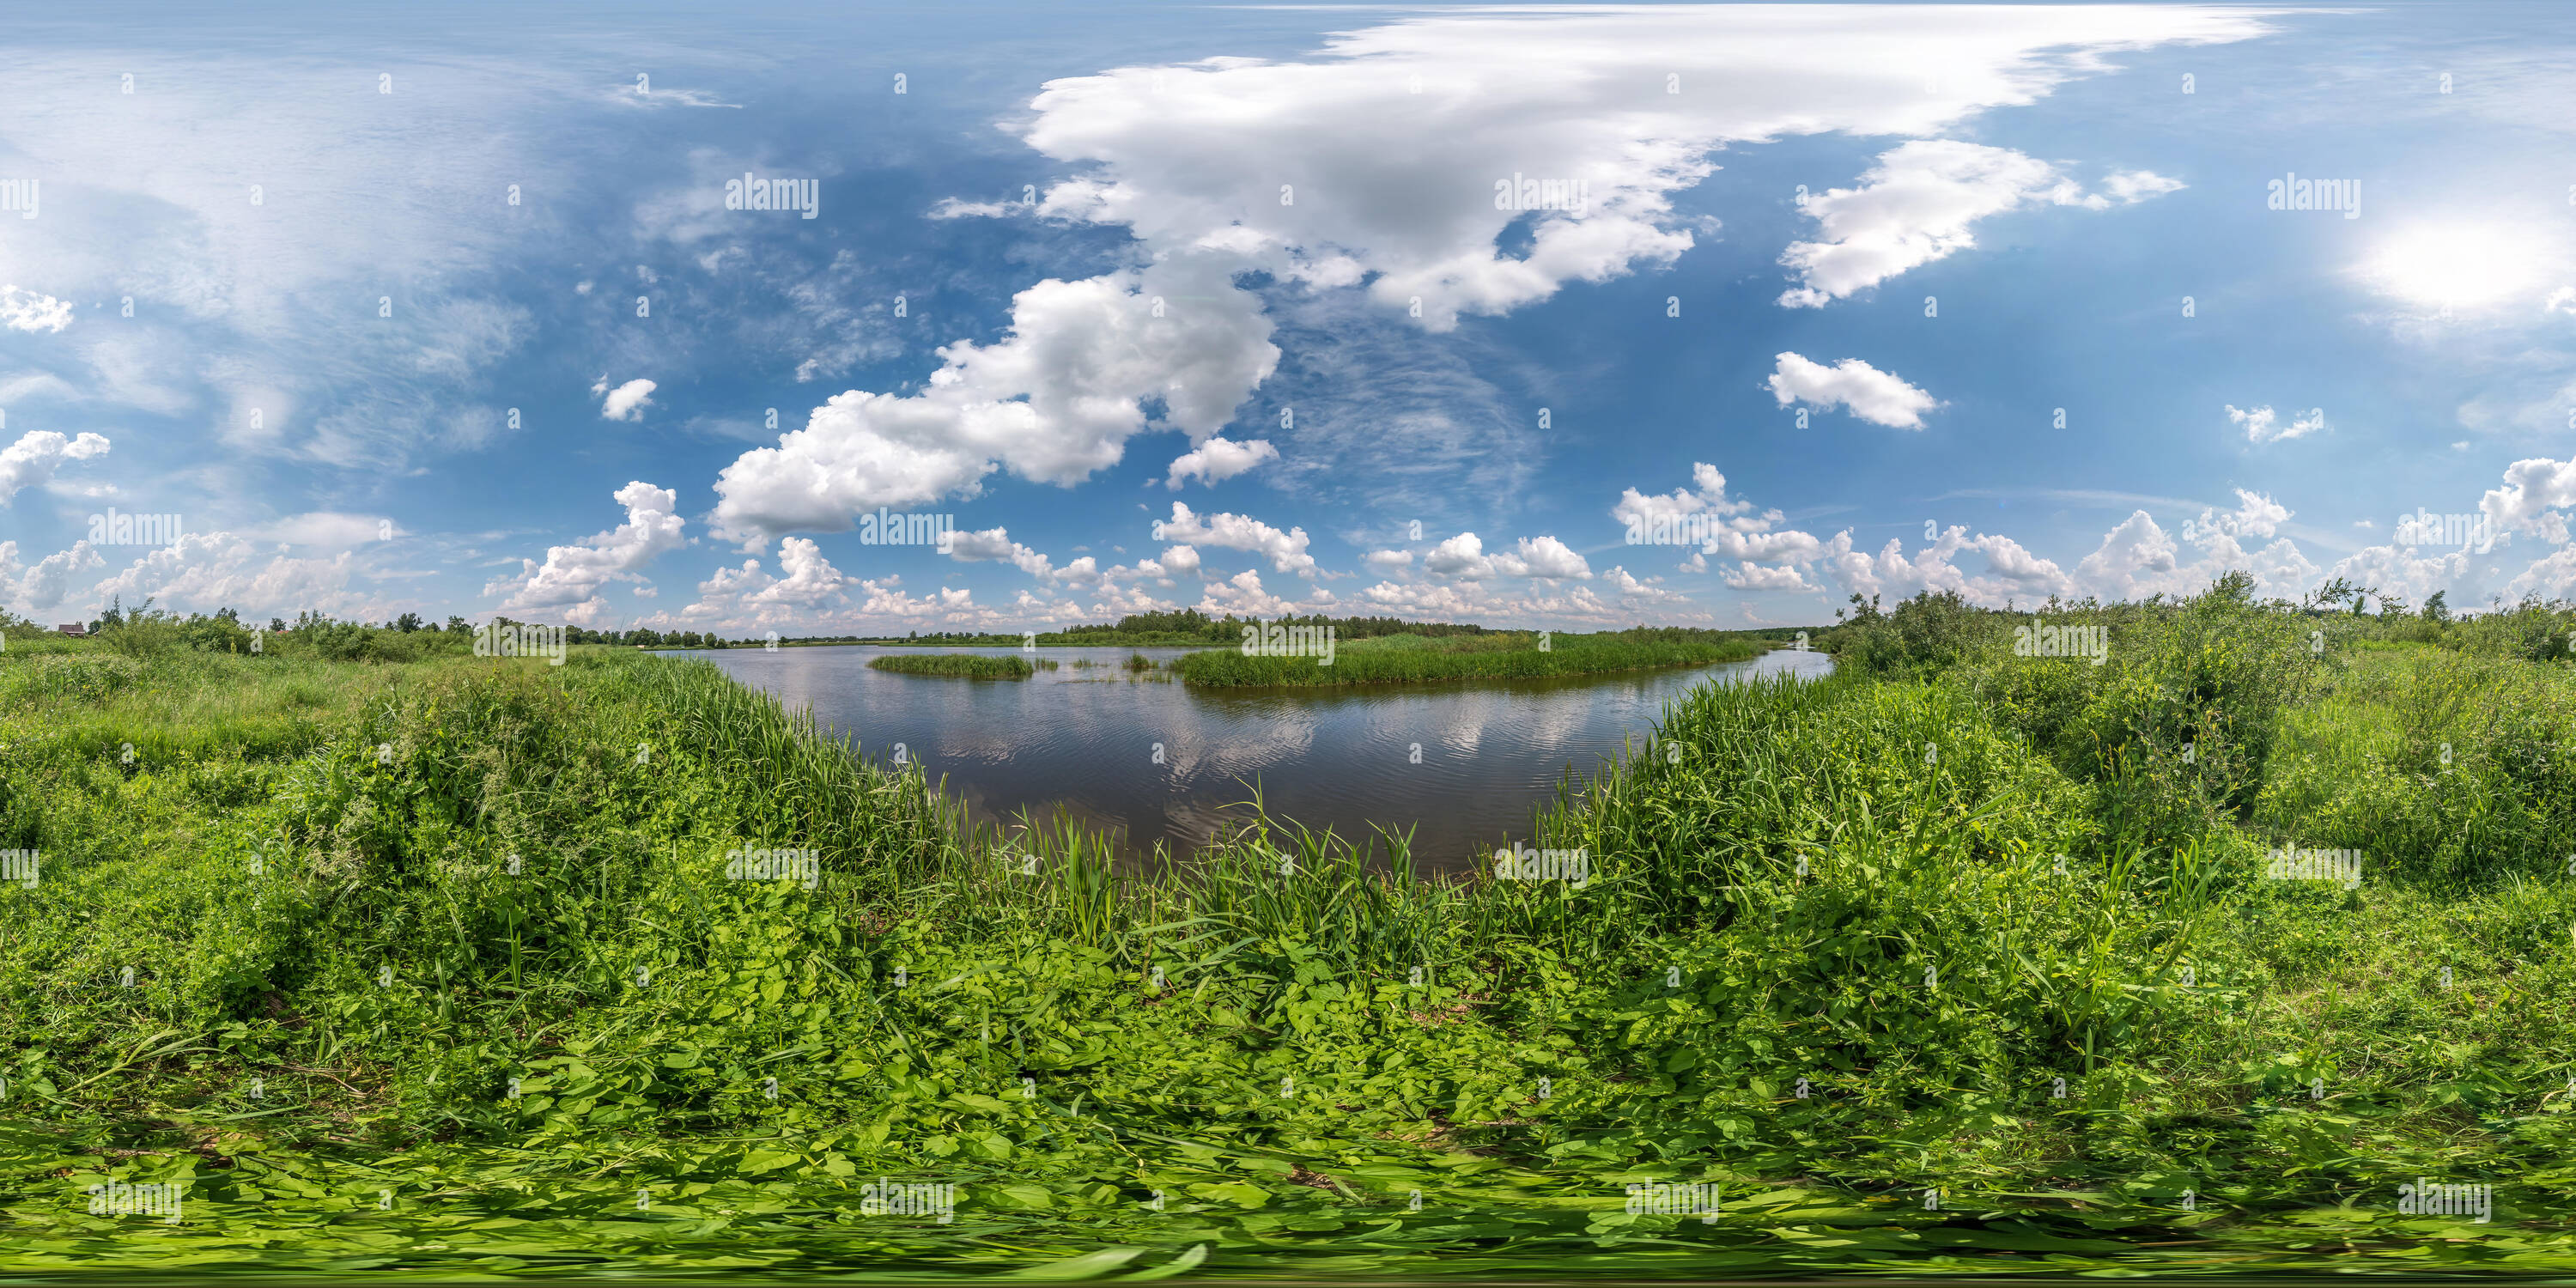 360 degree panoramic view of full seamless spherical hdri panorama 360 degrees angle view on grass coast of huge lake or river in sunny summer day and windy weather with beautiful